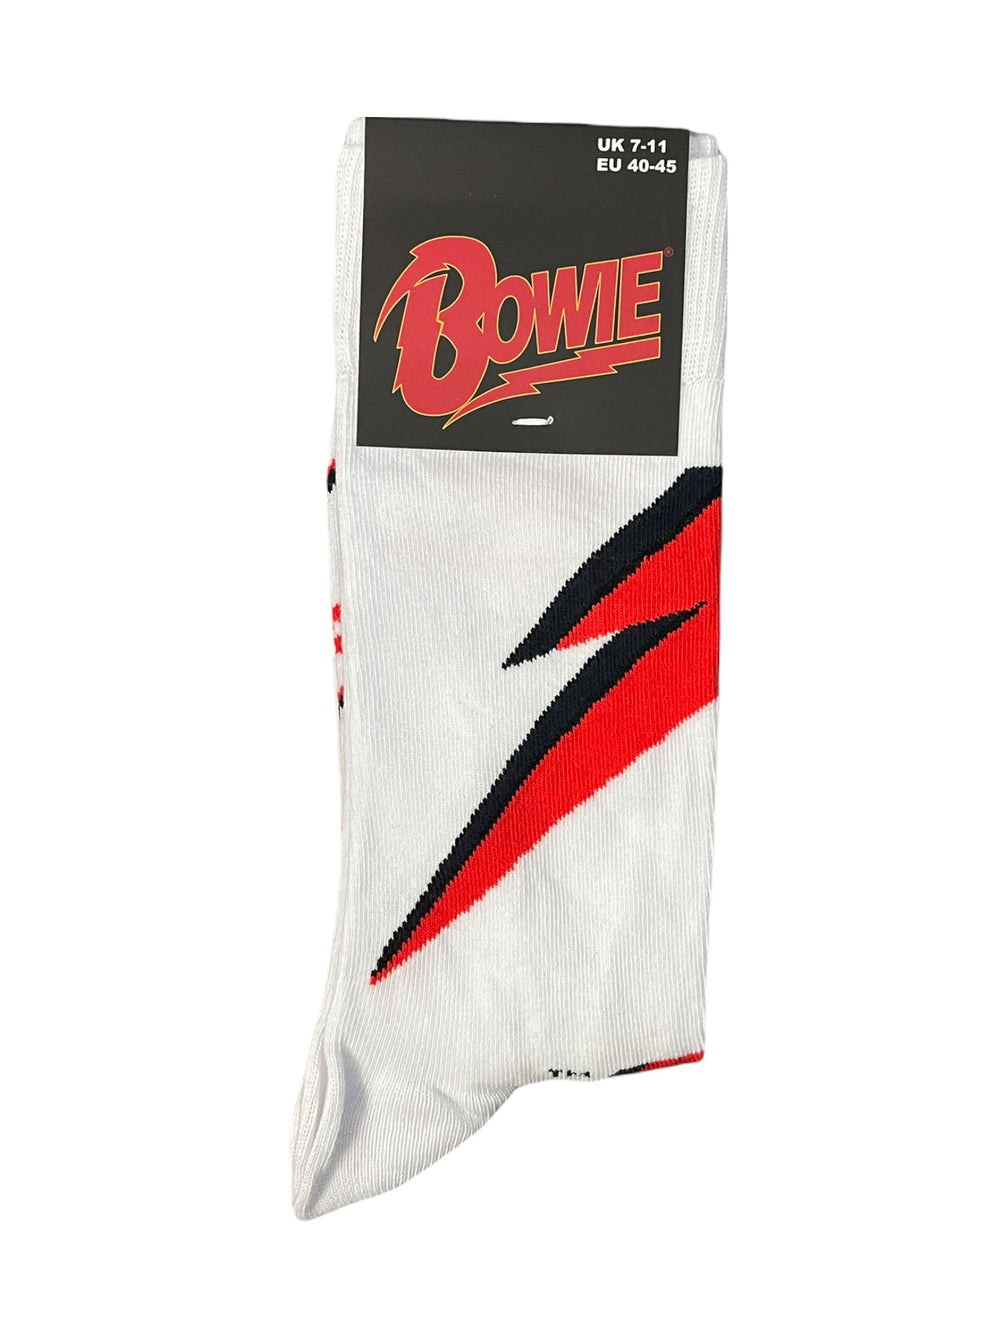 David Bowie FLASH Official Product 1 Pair Jacquard Socks Brand New